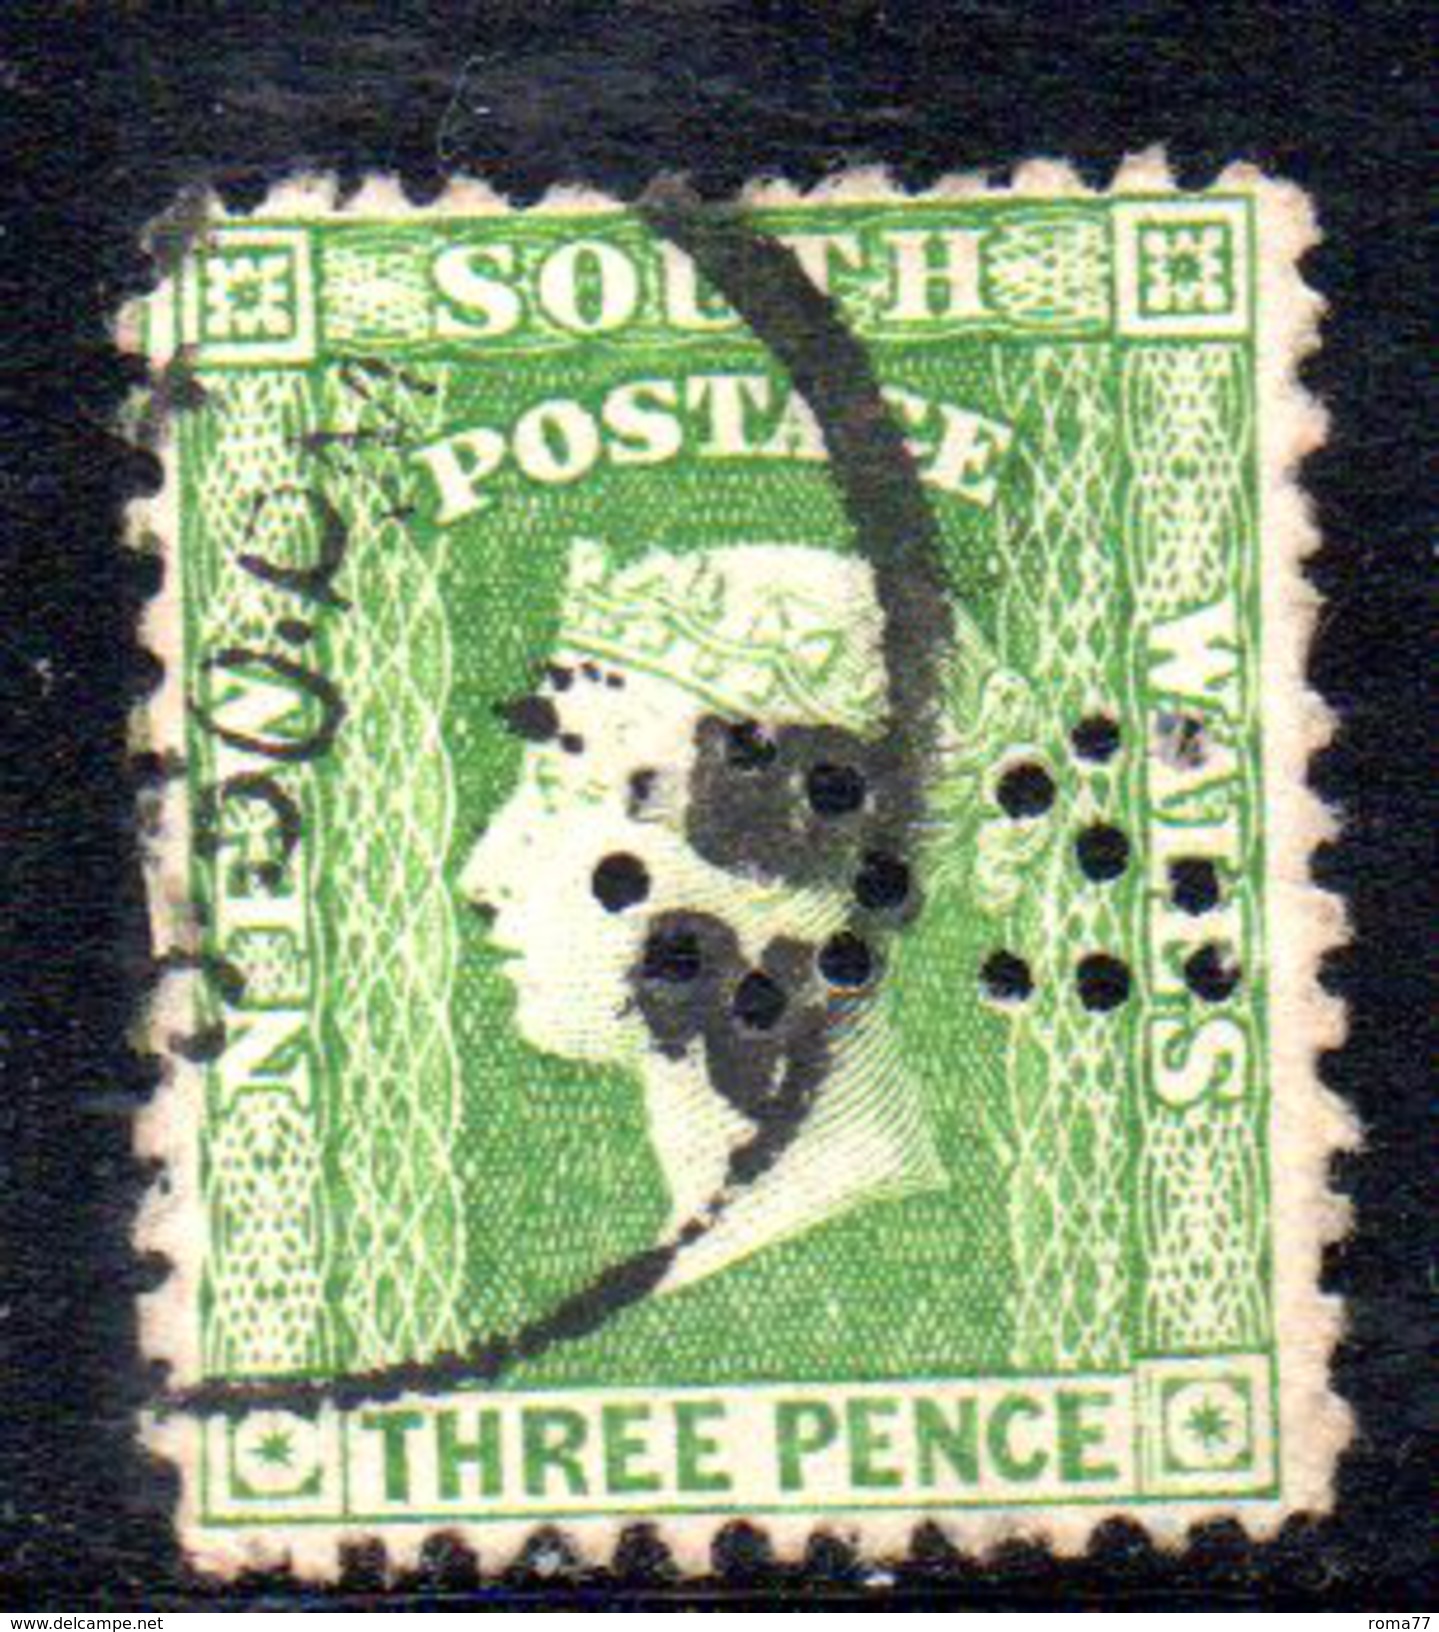 T1747 - NEW SOUTH WALES 3 Pence   Used . Punctured OS. - Gebraucht